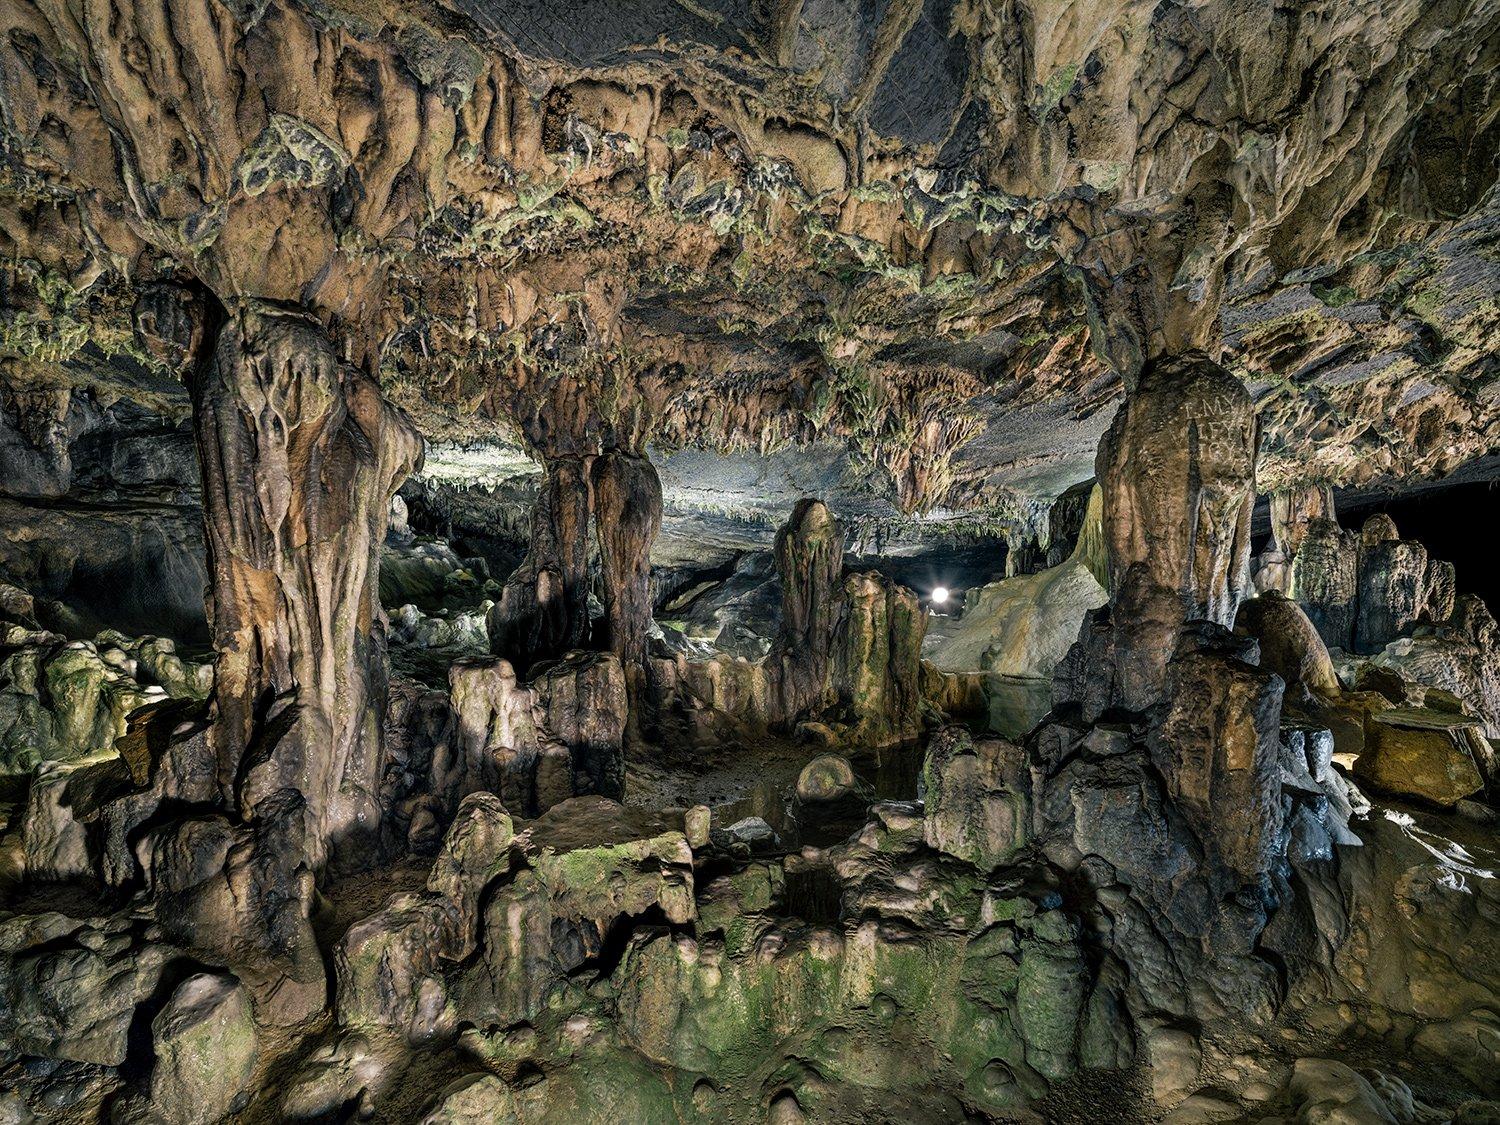 "RESPLENDENCE OF ANTIPODES
In the scope of civilization, the subterranean realm remains largely unchanged. Isolated in darkness for hundreds of millions of years, the sunless underworld encompasses majestic ancient formations gradually eroded into